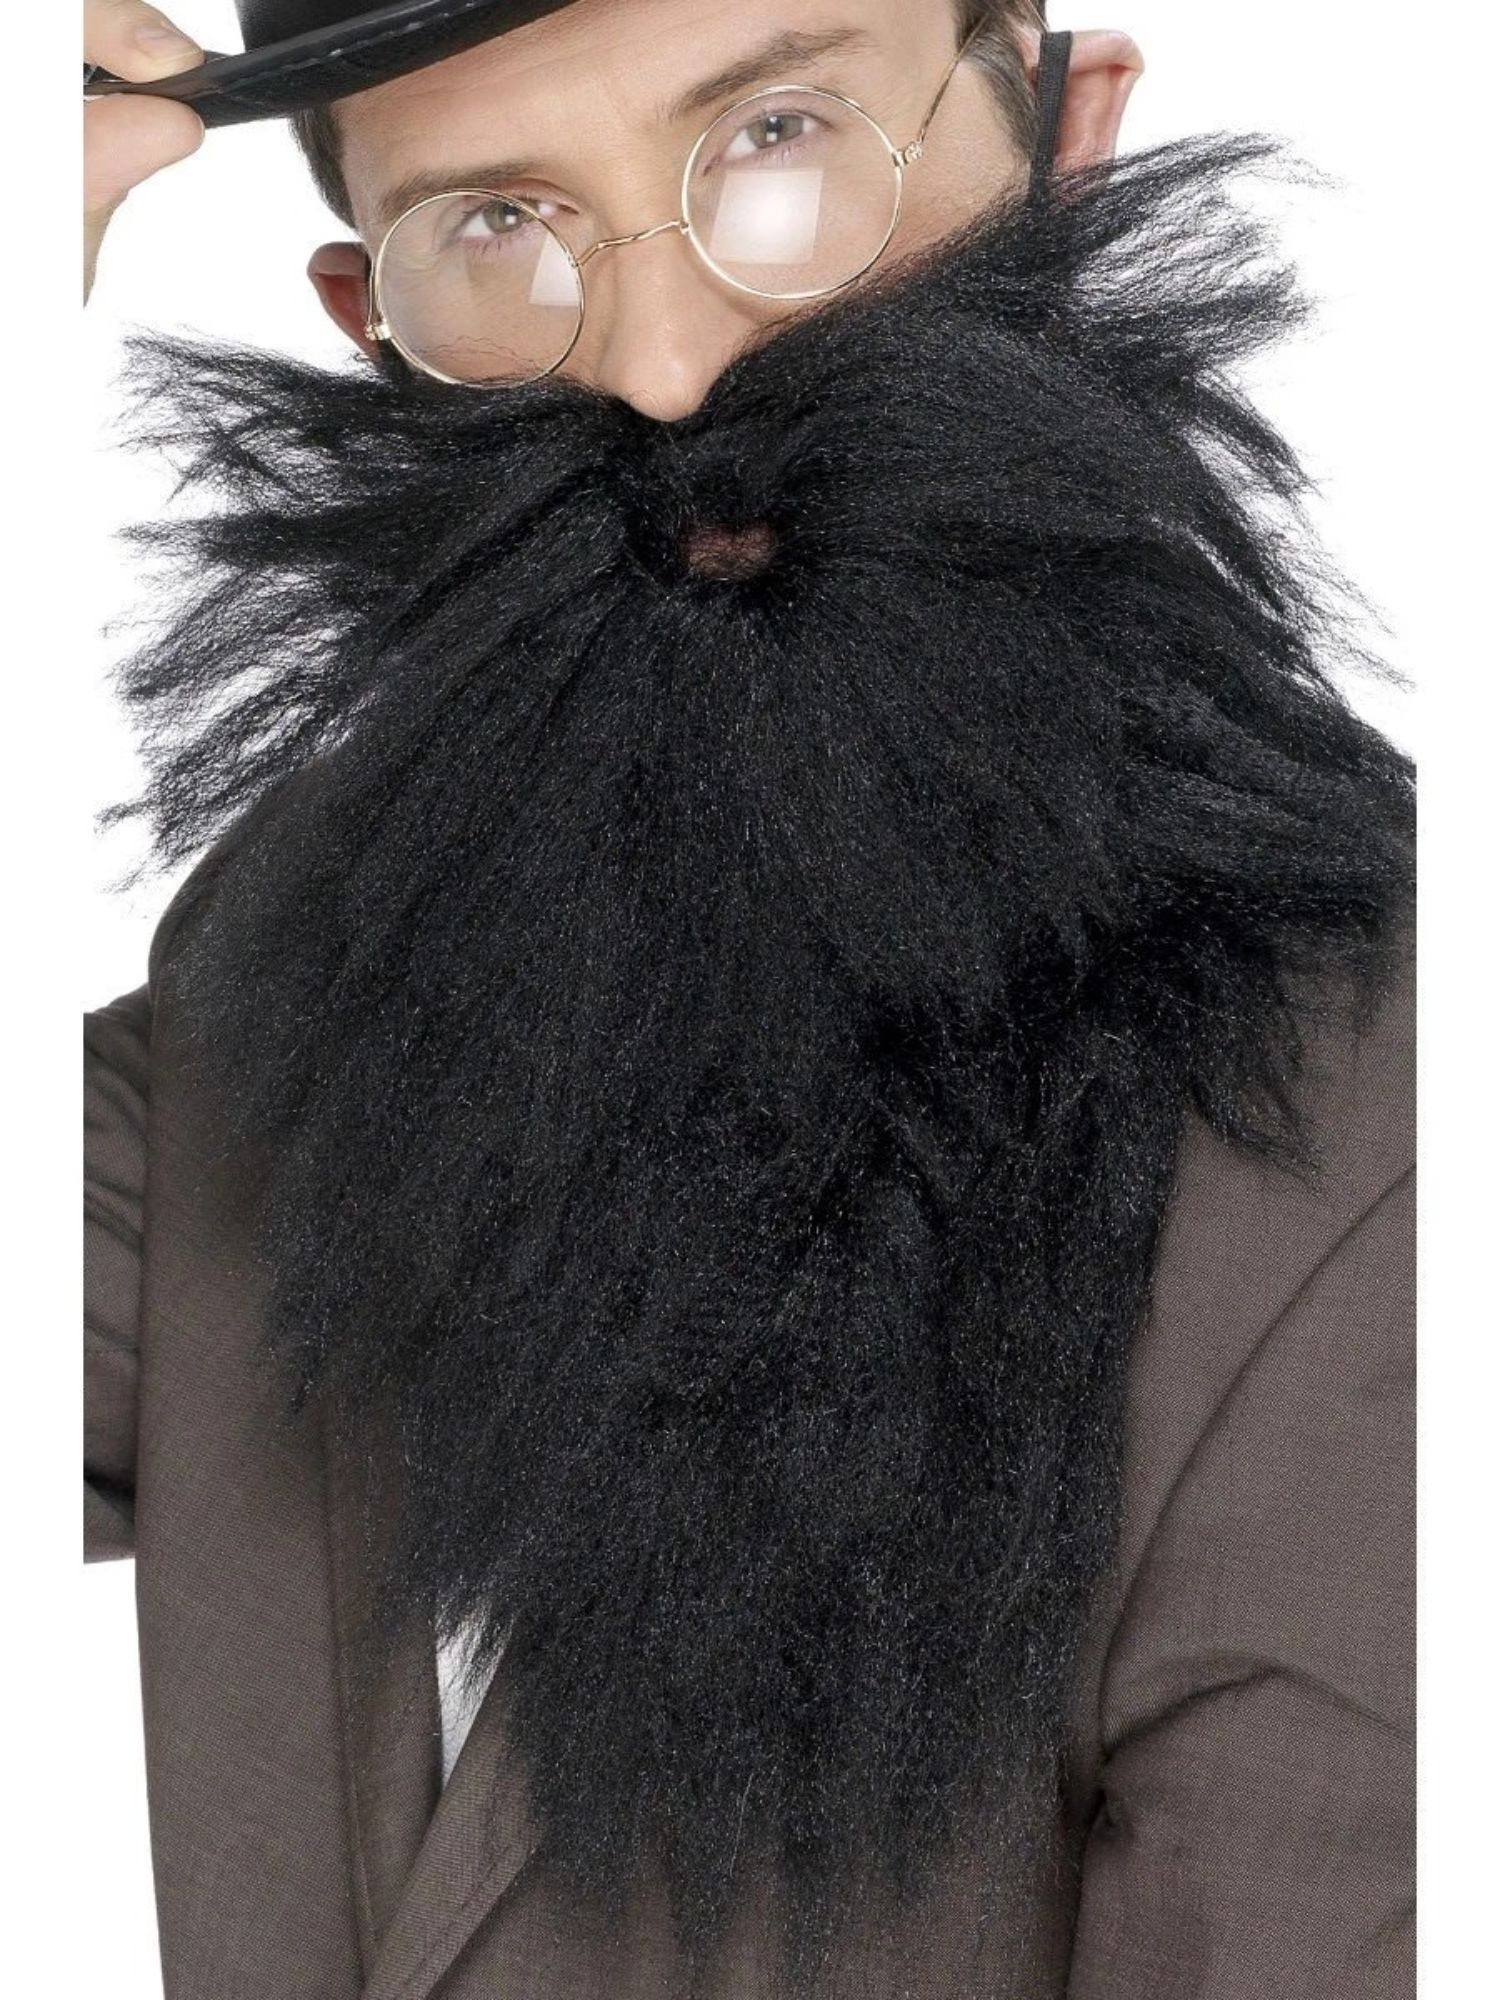 Smiffys 29.5" Black Men Adult Halloween Long Beard and Tash with Specs Costume Accessory - One Size